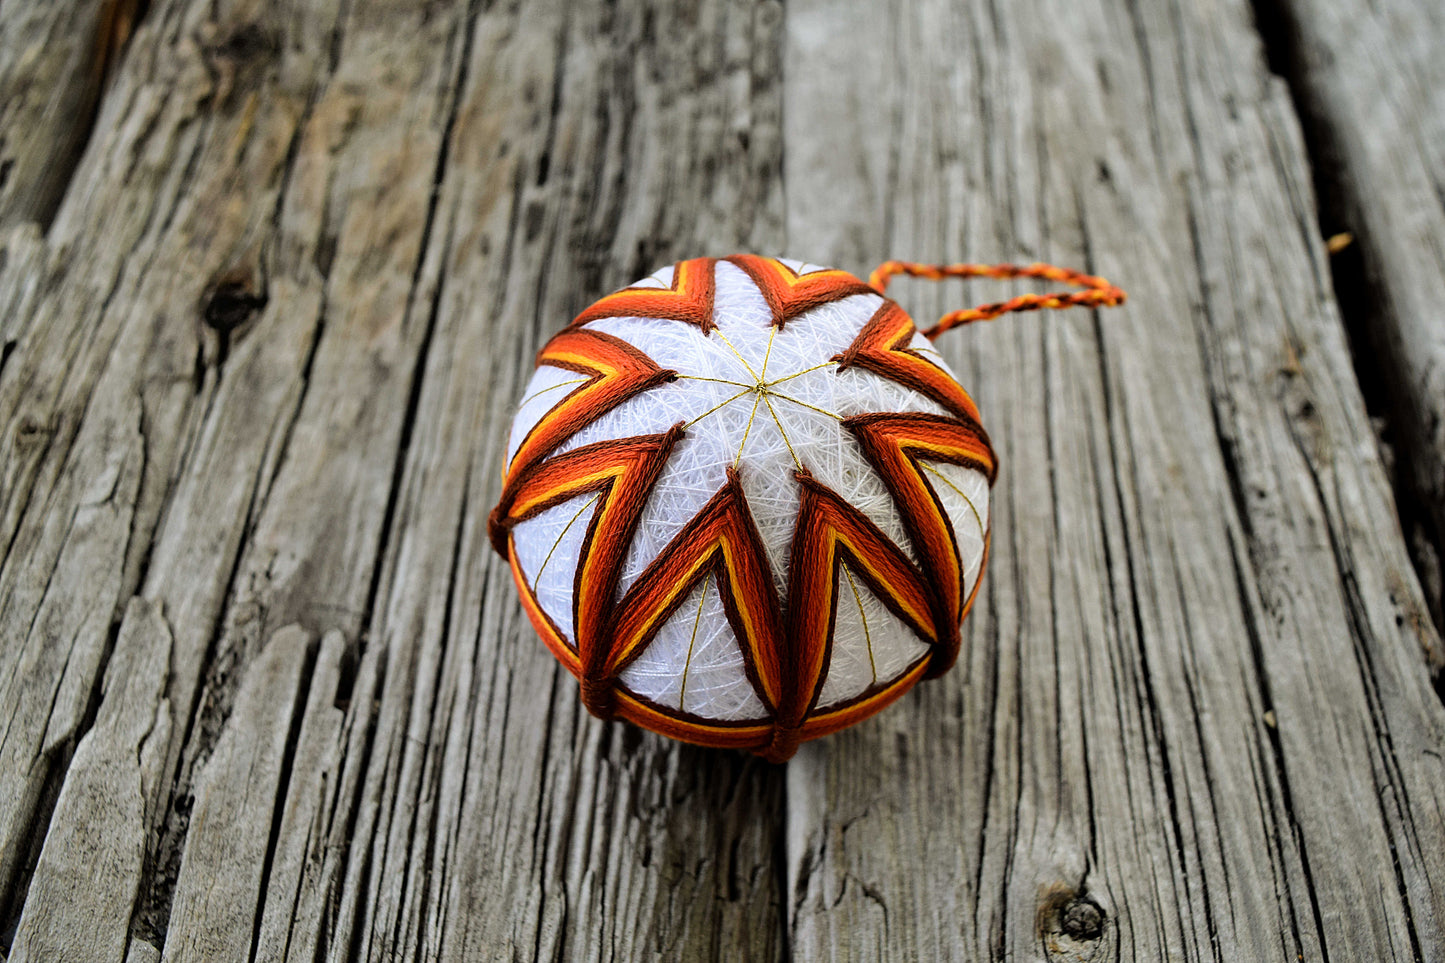 Orange and brown temari ball embroidered in a star pattern on wood background